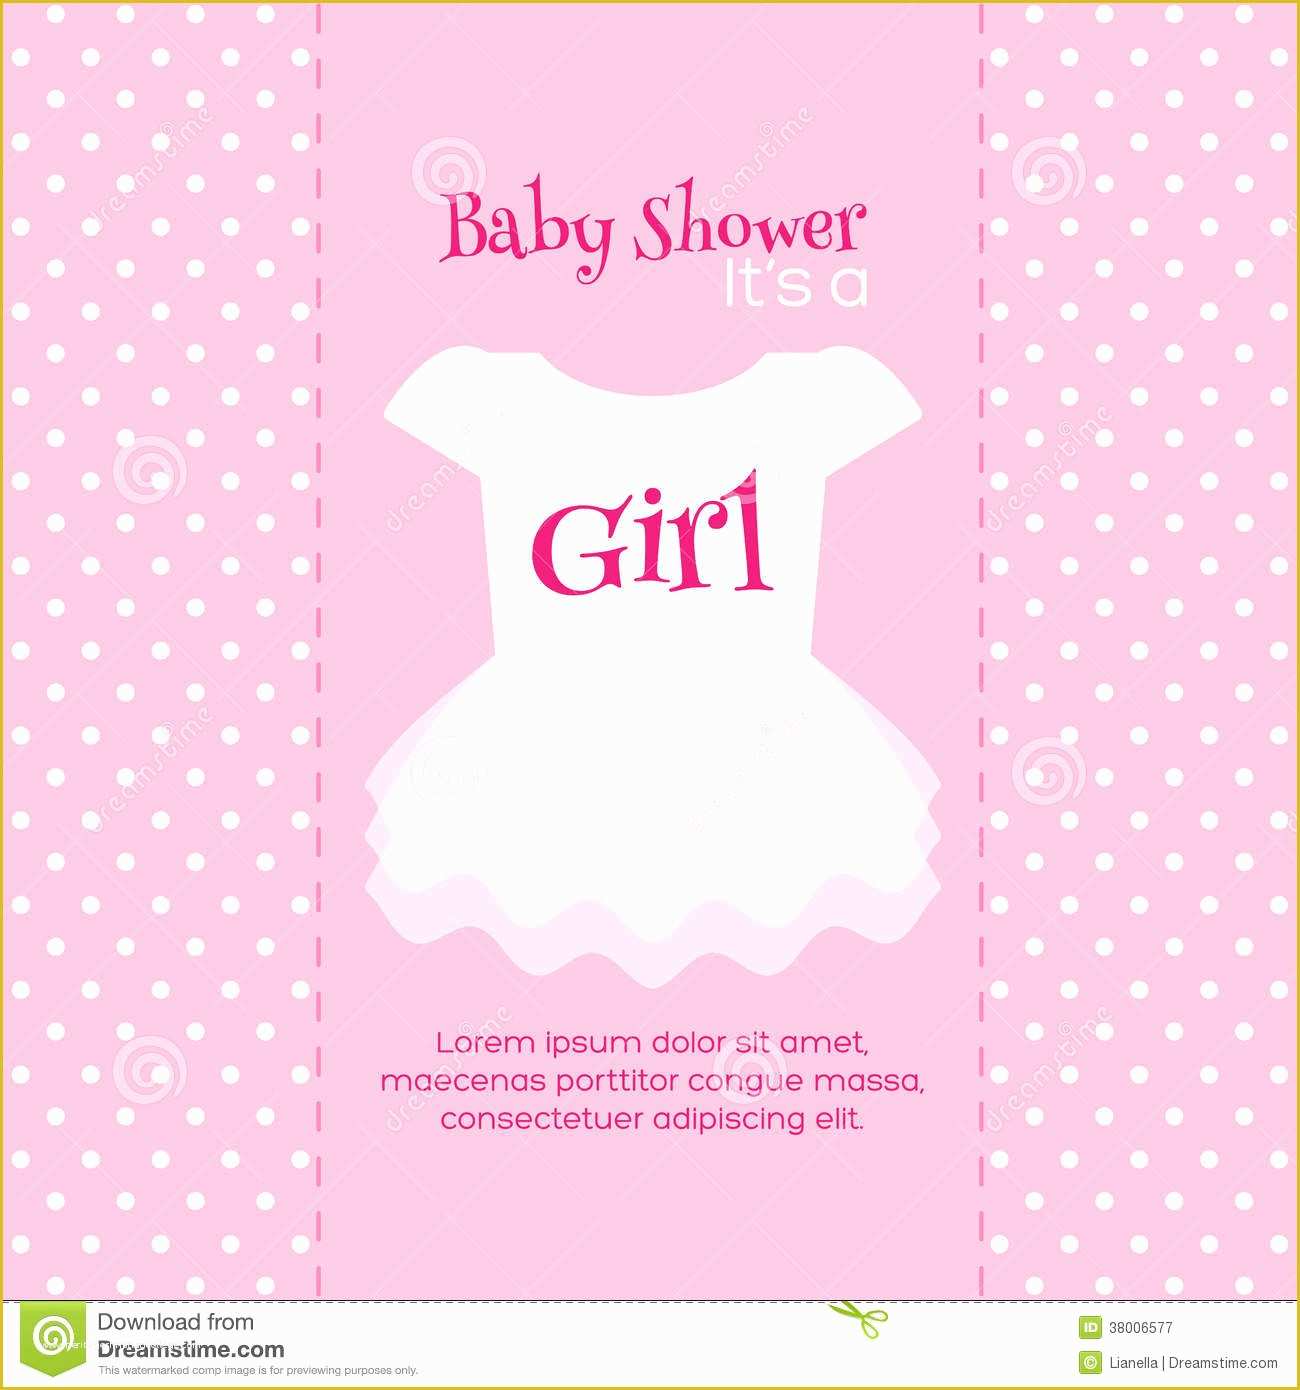 Free Diaper Shower Invitations Templates Of Baby Invites Template